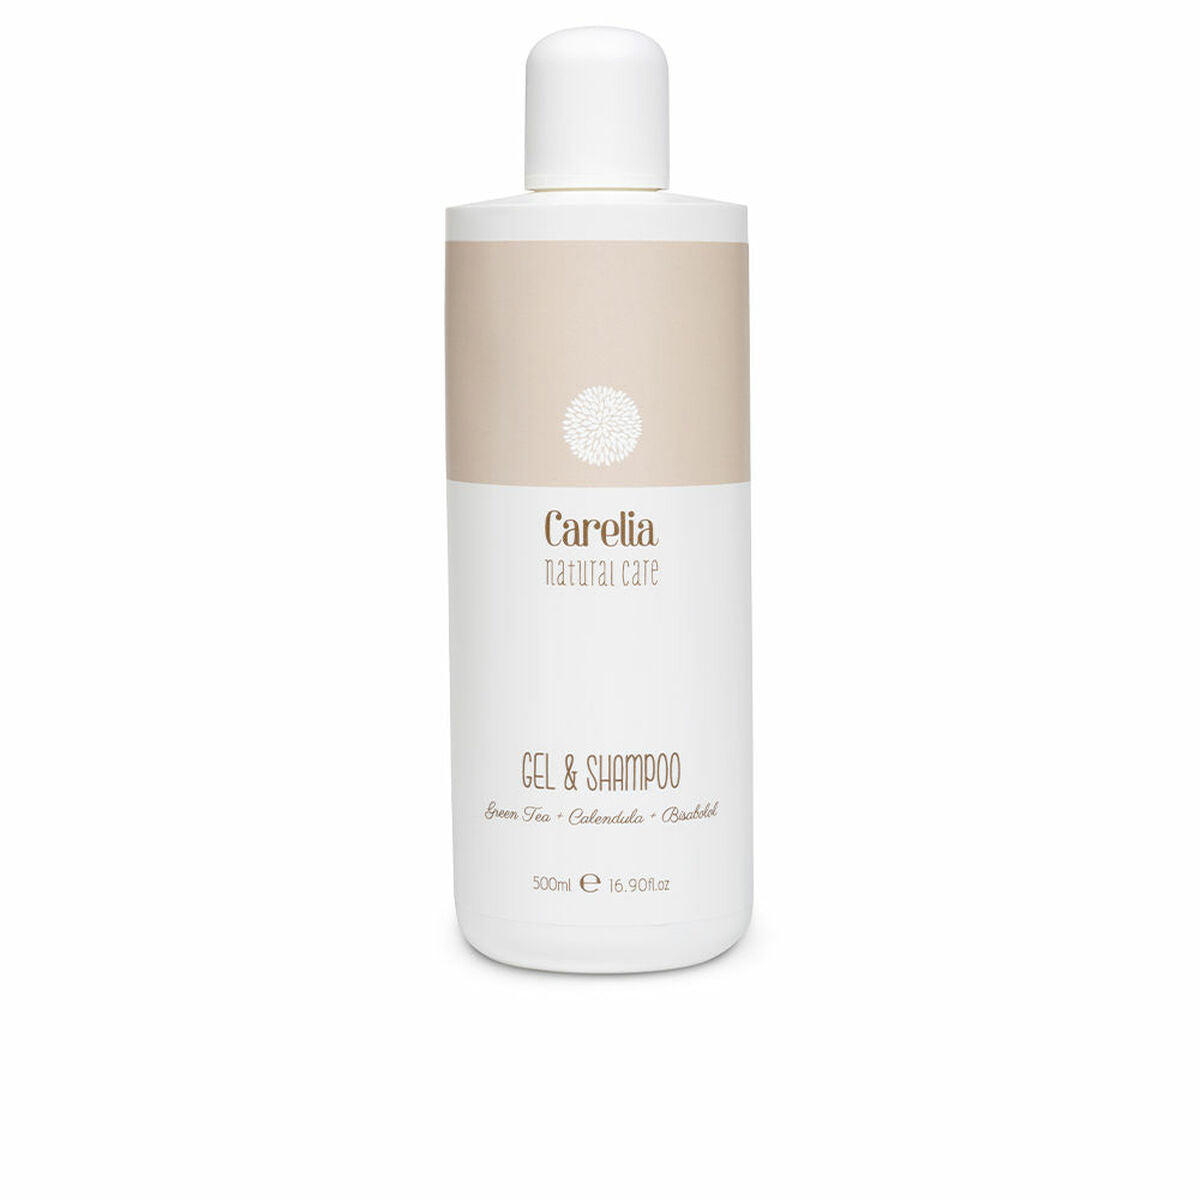 2-in-1 Gel and Shampoo Carelia Natural Care 500 ml - Calm Beauty IE